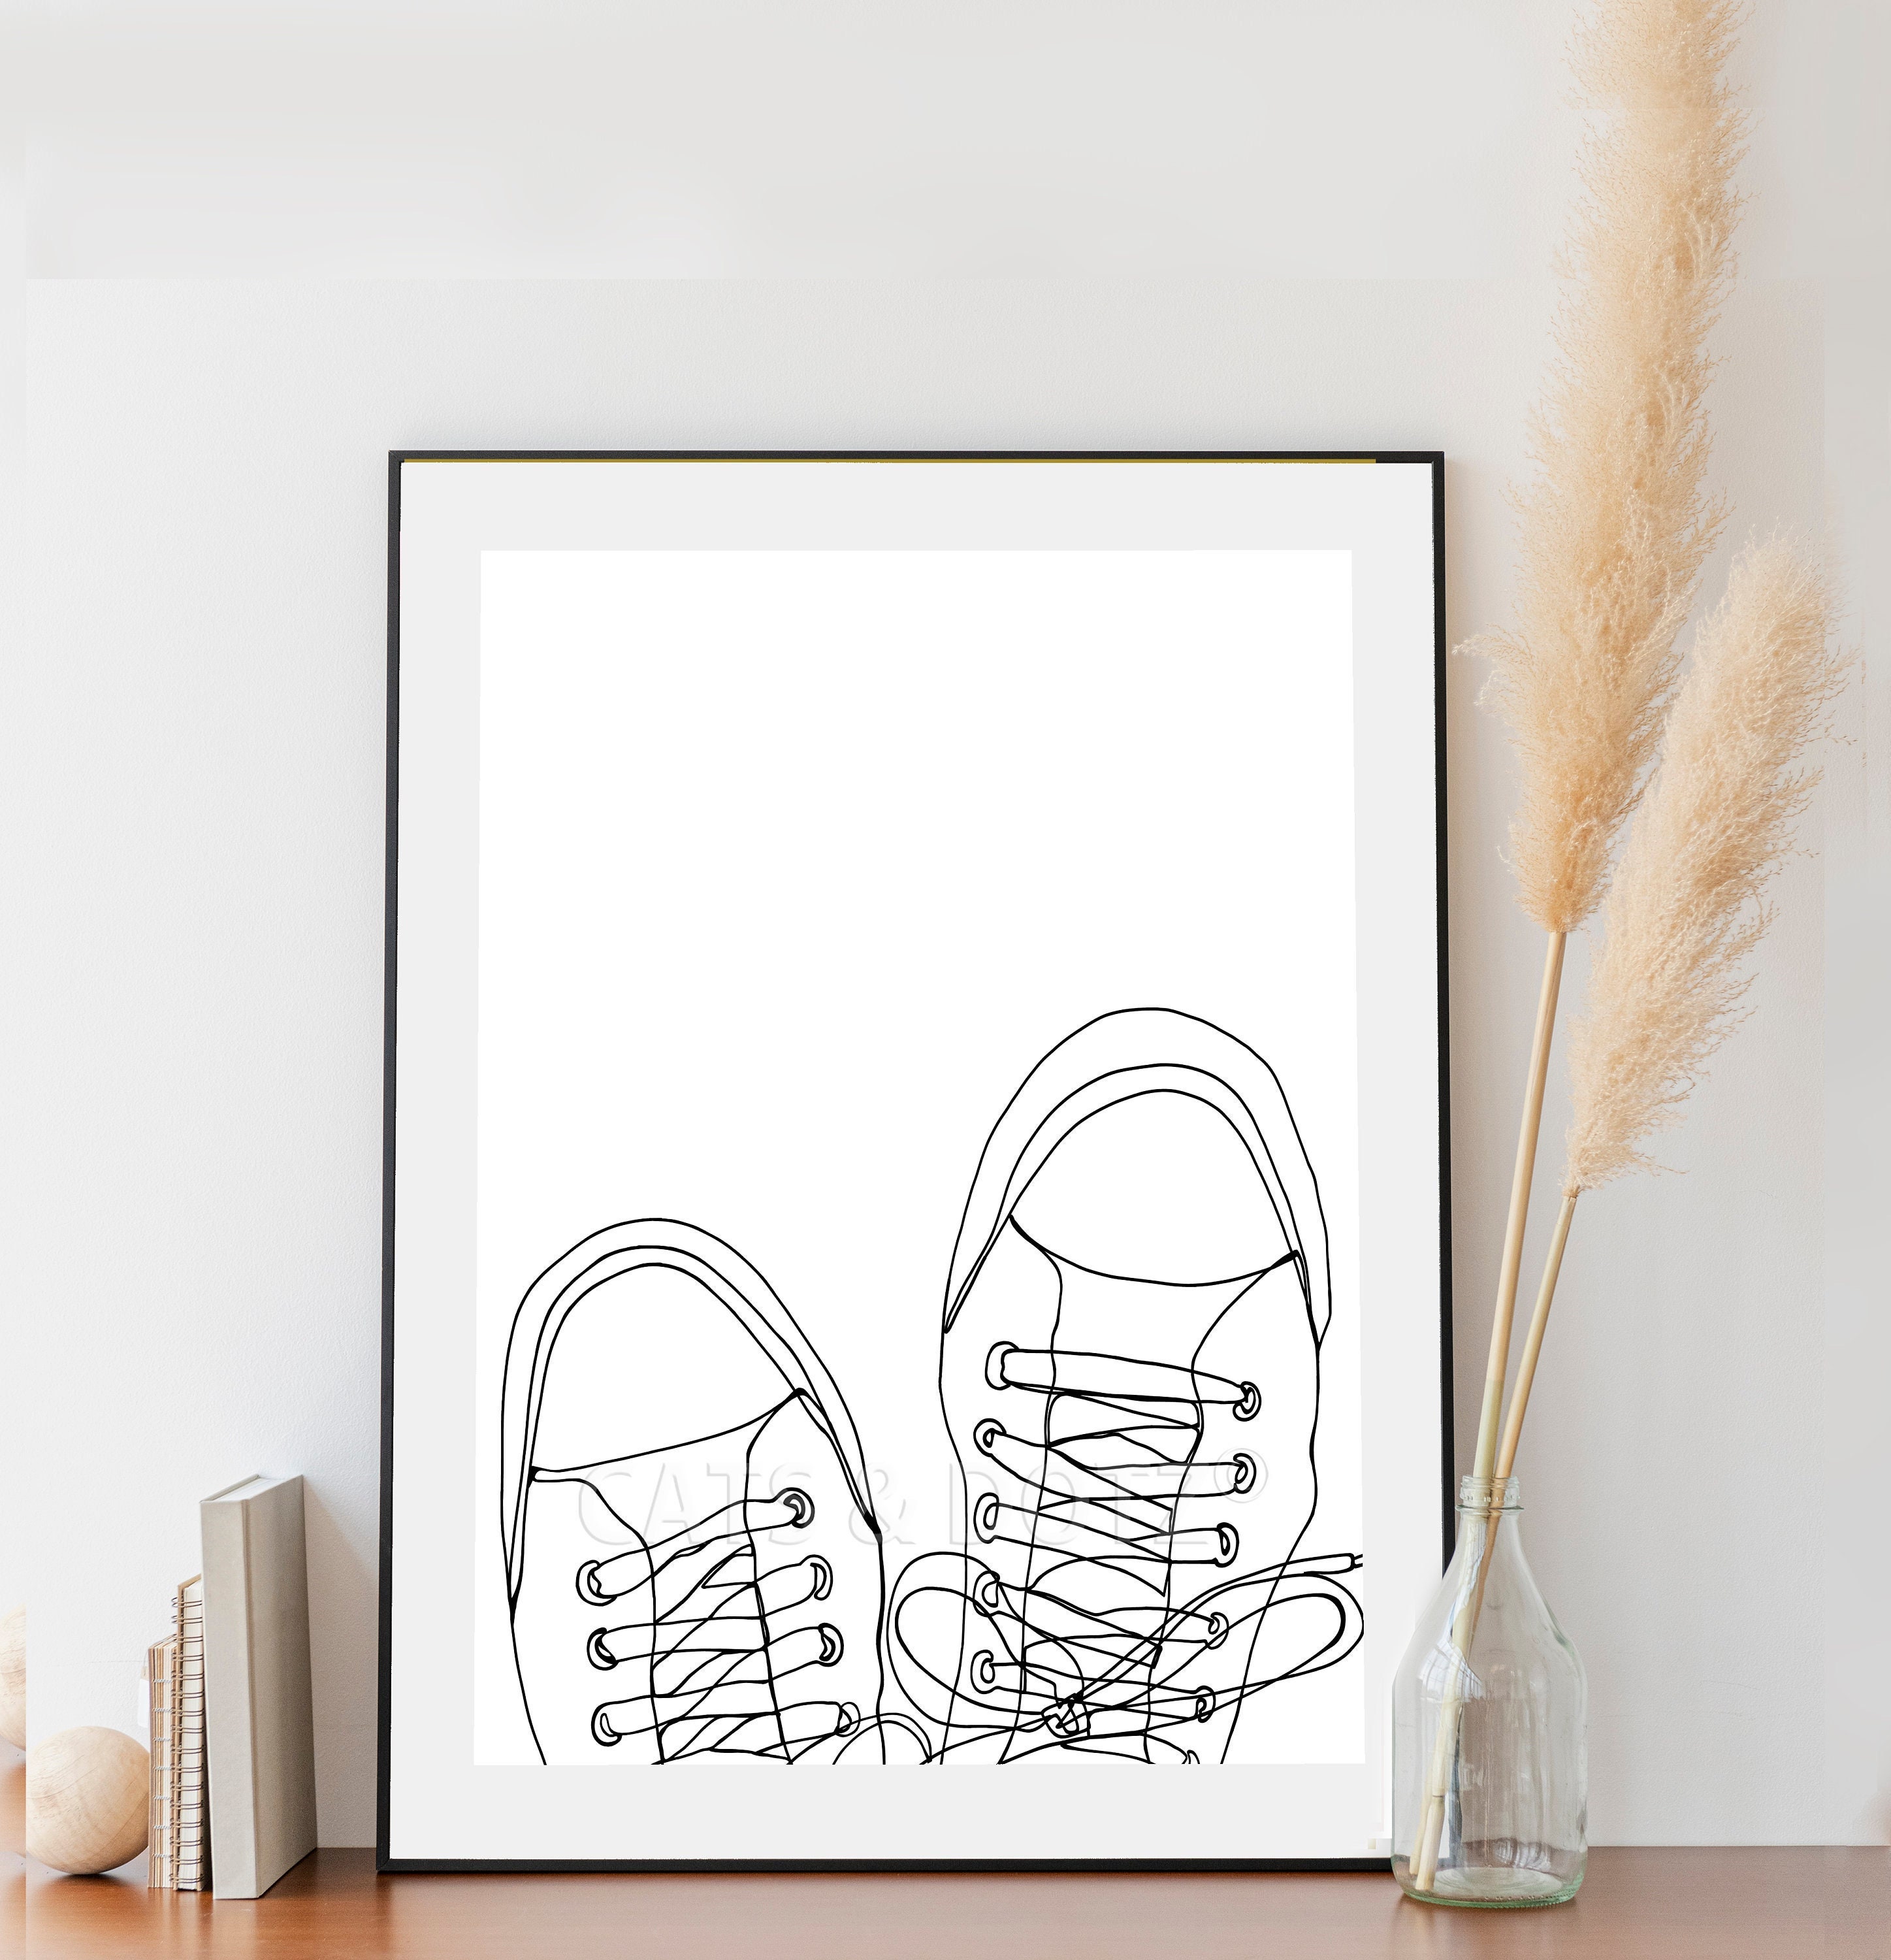 Discover more than 79 abstract sneaker art latest